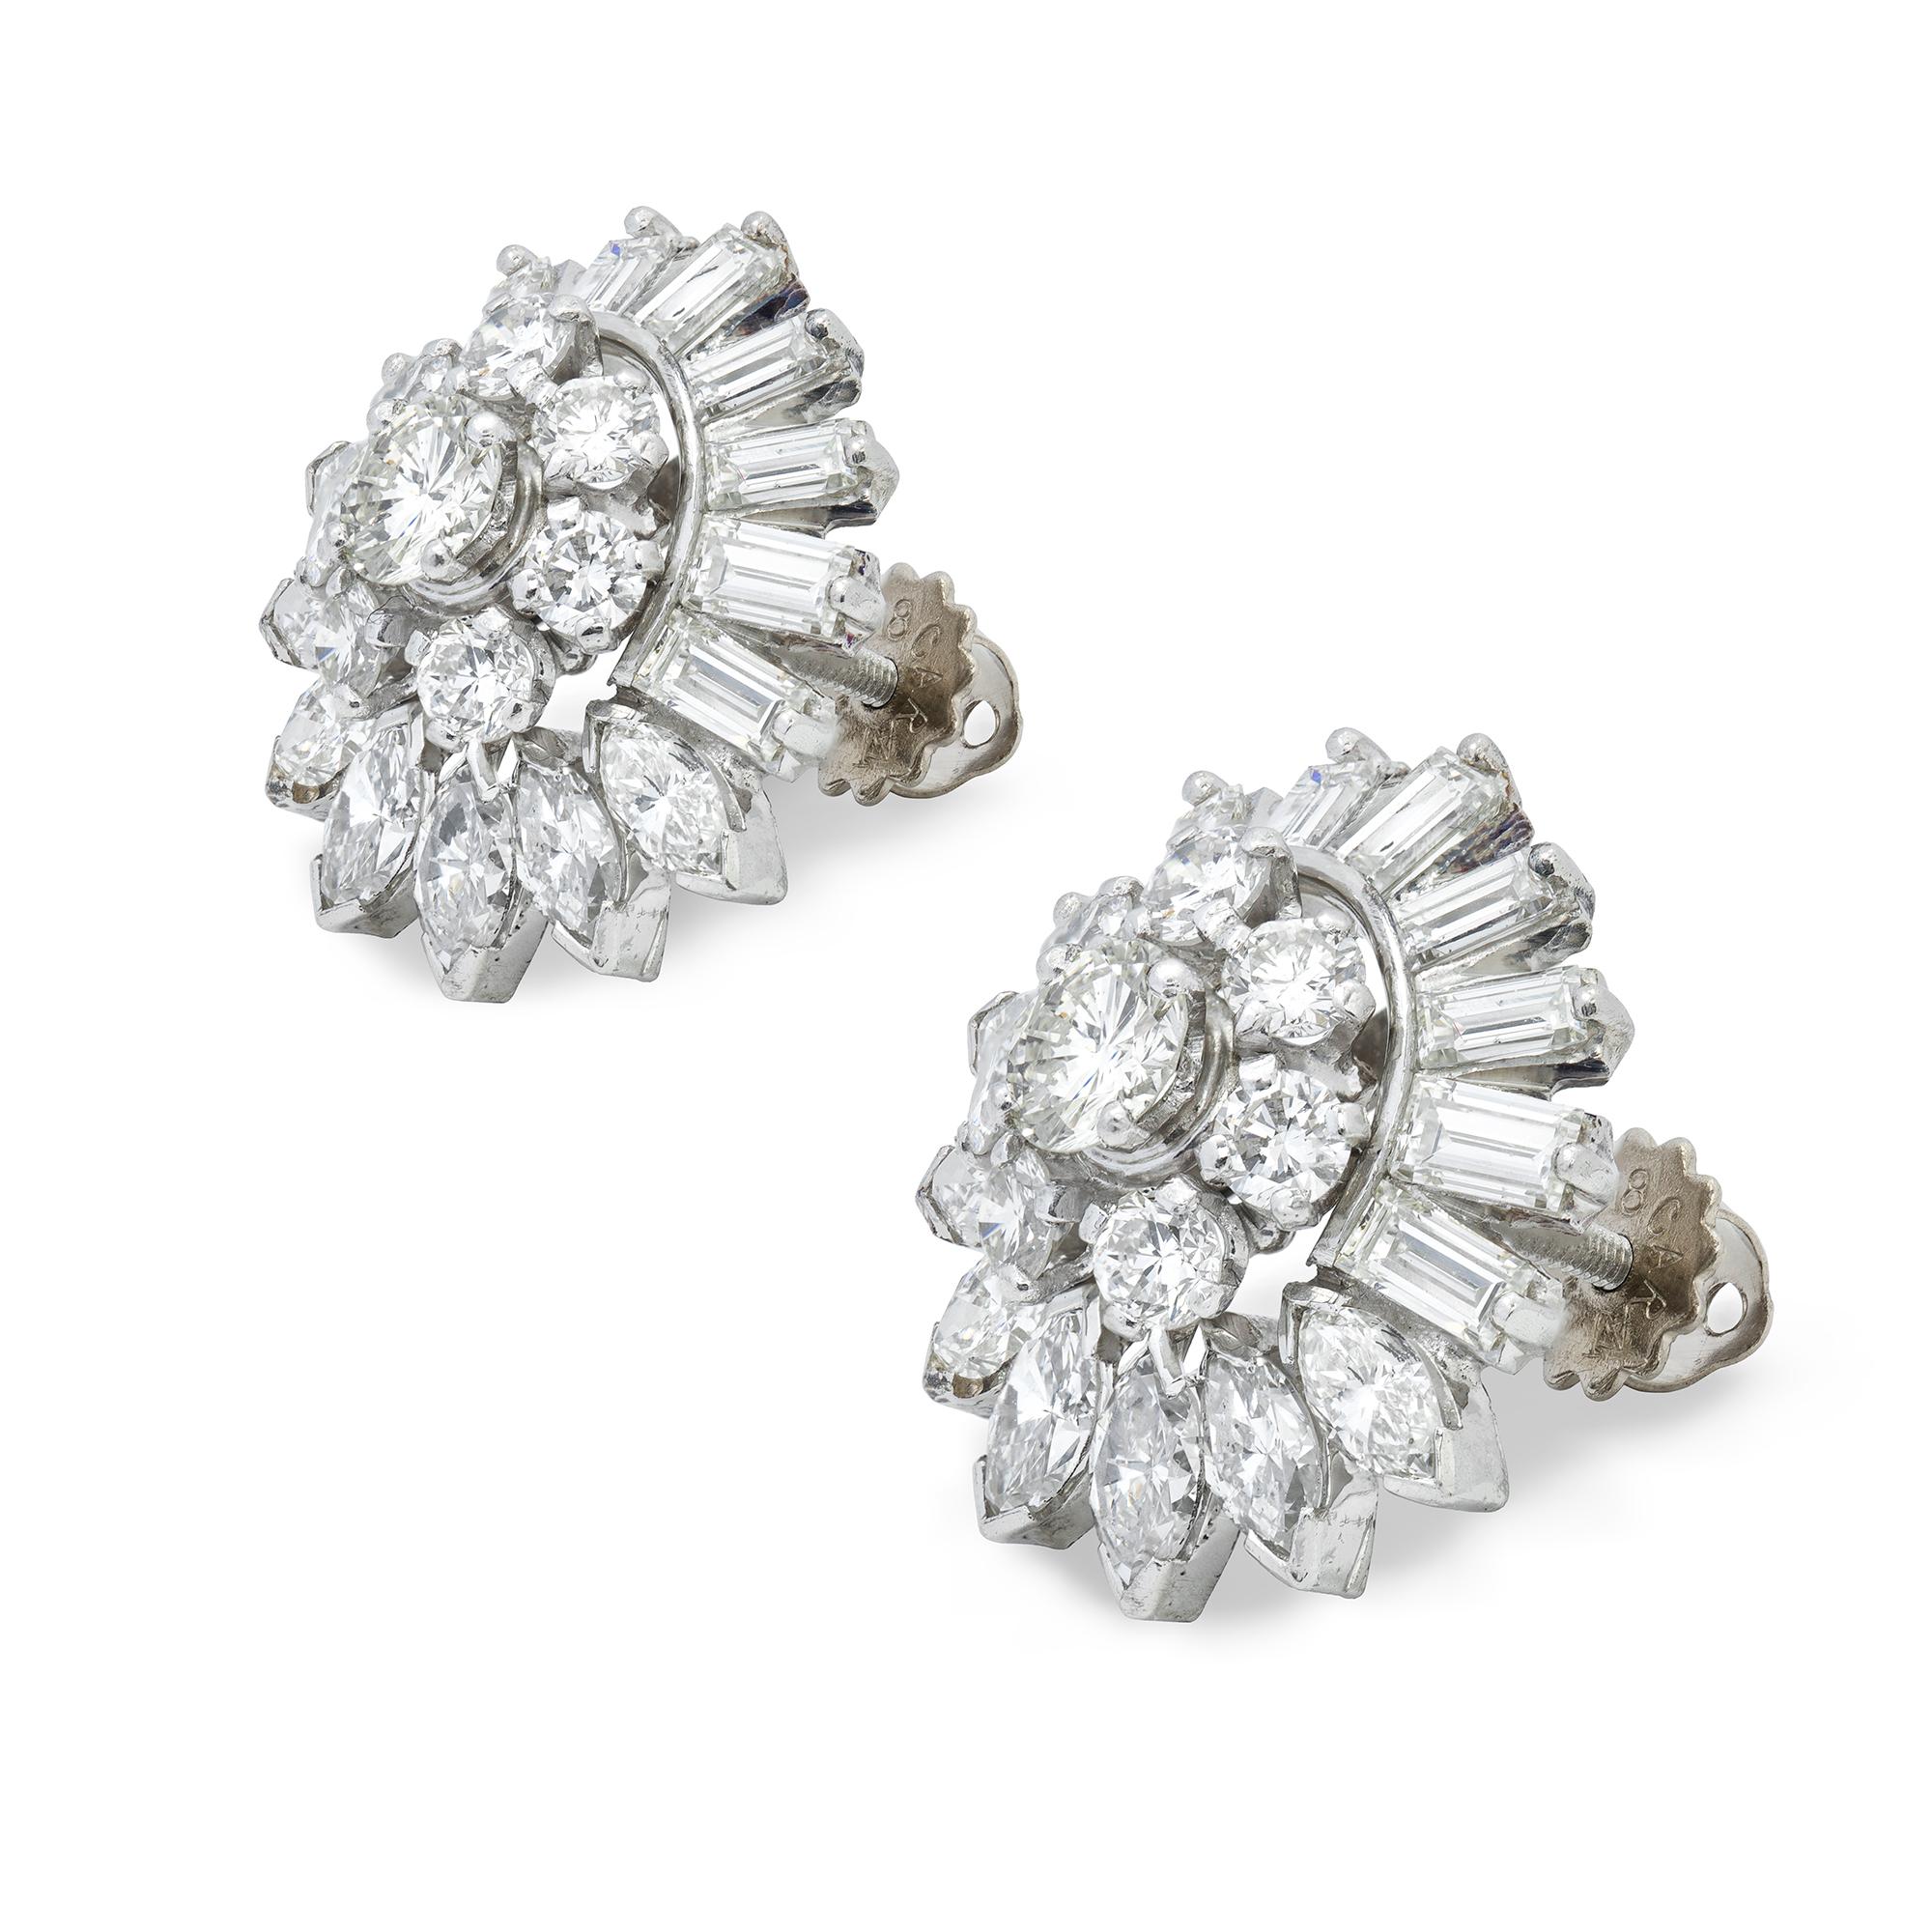 A mid-20th century pair of diamond earrings, each centre set with a round brilliant-cut diamond estimated to weigh  approximately 0.40 carat, surrounded by seven smaller round brilliant-cut diamonds, all within a cluster of seven marquise-cut and